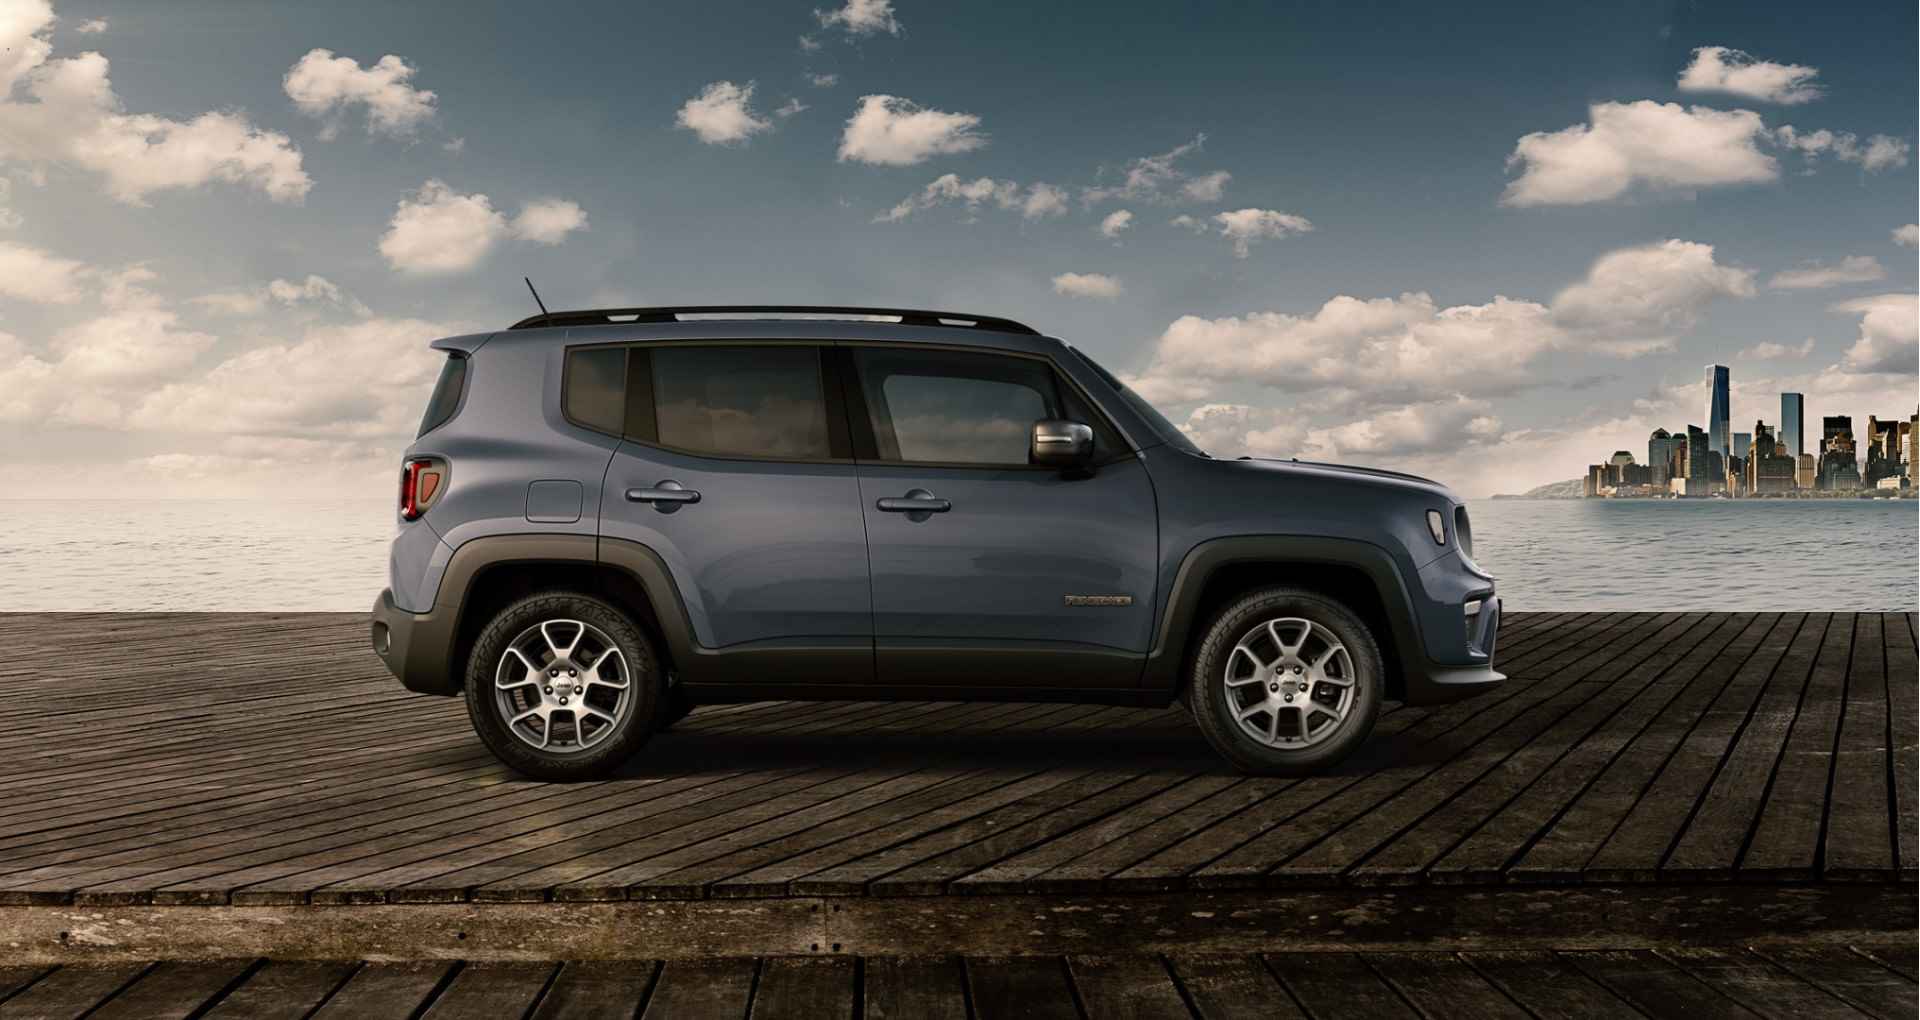 Jeep Renegade 1.5T 130 pk Automaat e-Hybrid Limited Convenience Pack | Style Pack |  Visibility Pack | Uconnect™ LIVE-infotainmentsysteem met 8,4-inch Touchscreen, Navigatie en Bluetooth - 4/9